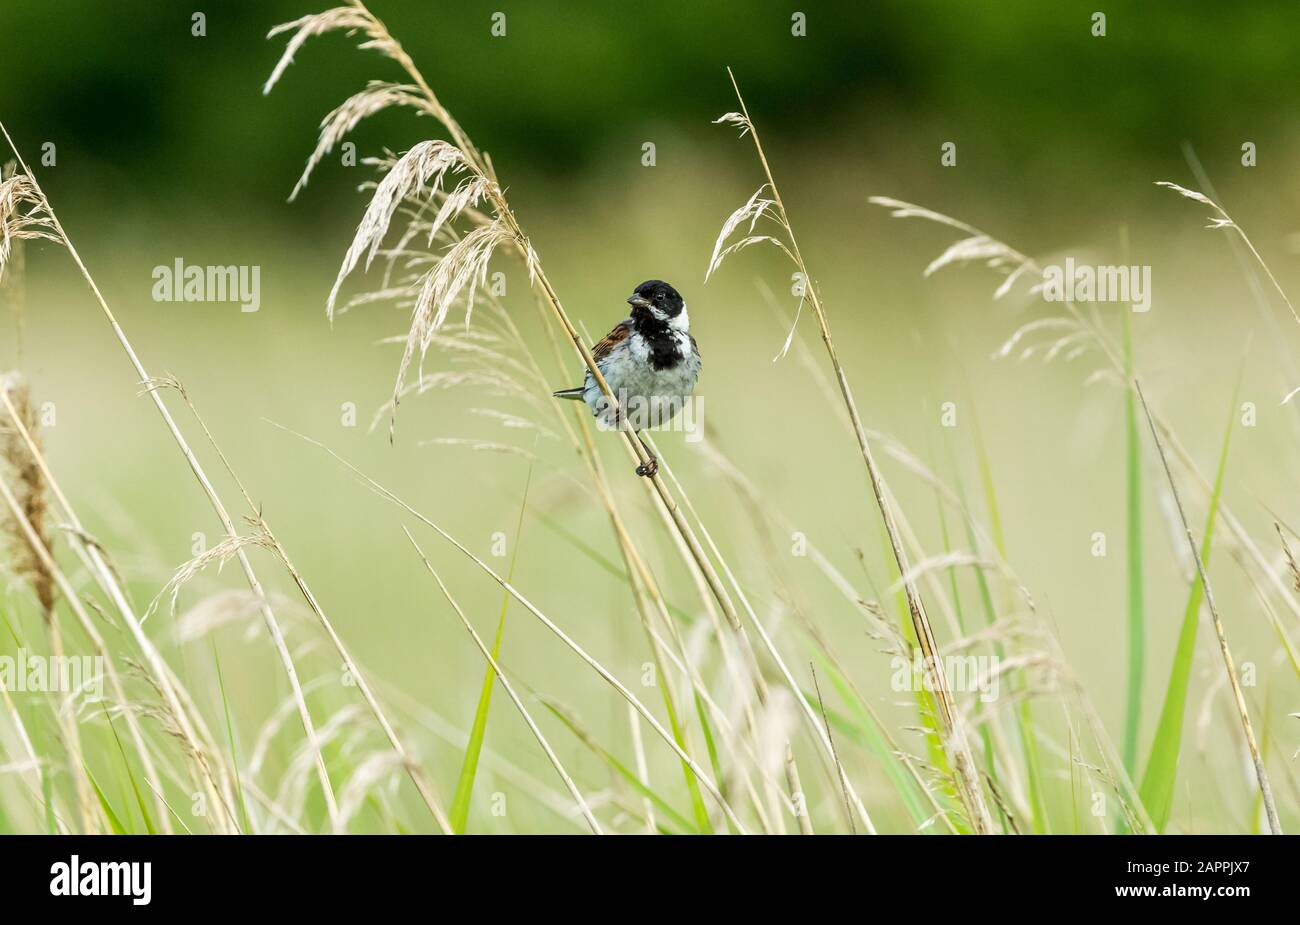 Male Reed bunting (Scientific name: Emberiza schoeniclus) perched on a grass stem in natural reed bed habitat. Facing forward. Landscape. Copy space Stock Photo